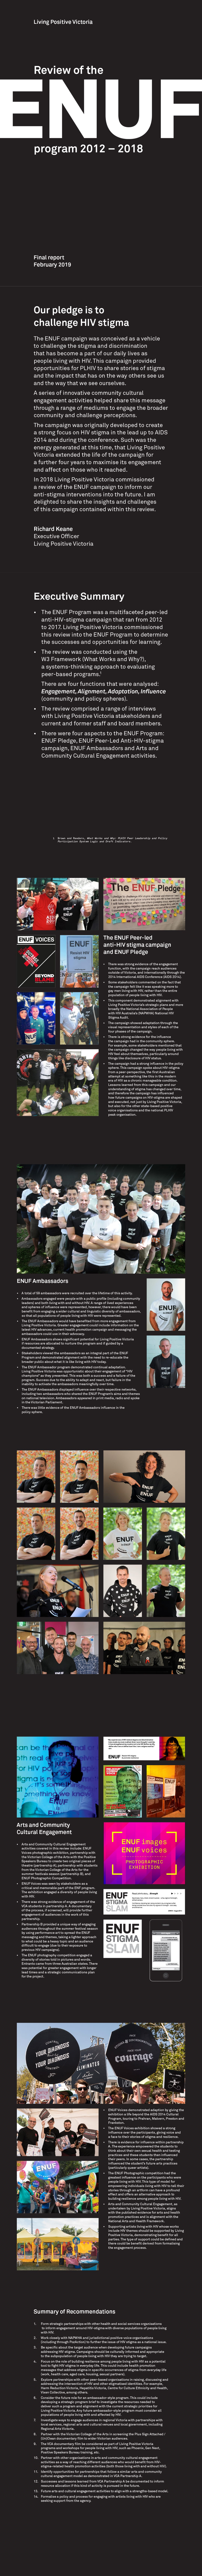 Review of the ENUF program 2012 – 2018